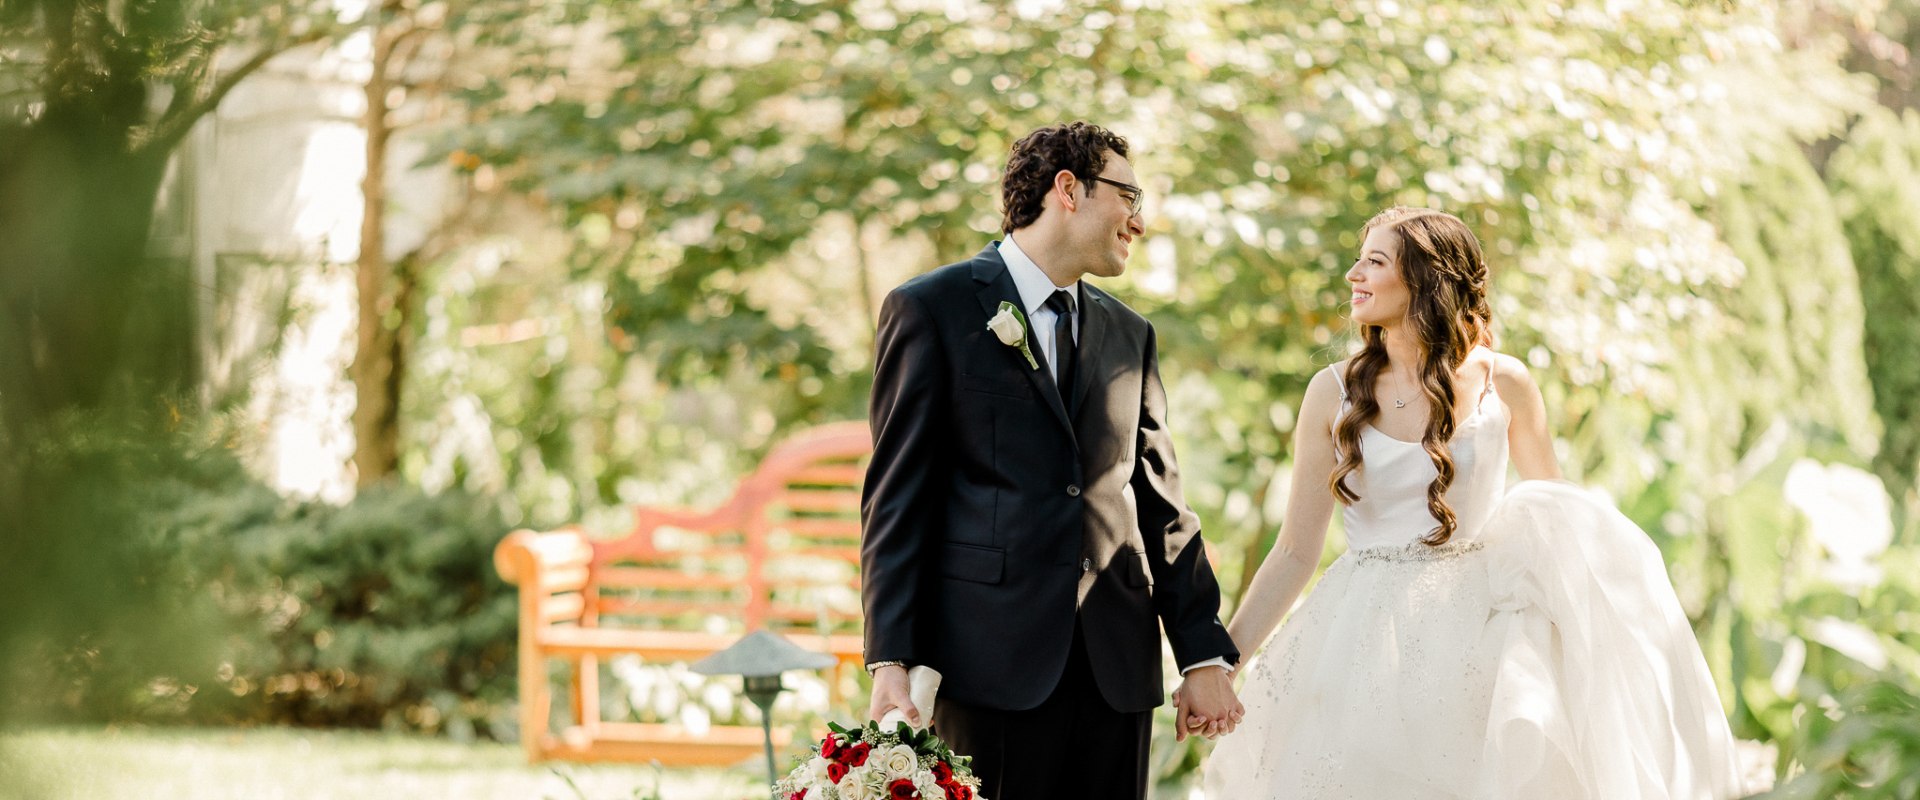 Comparing Videographer Portfolios and Styles for Your Wedding